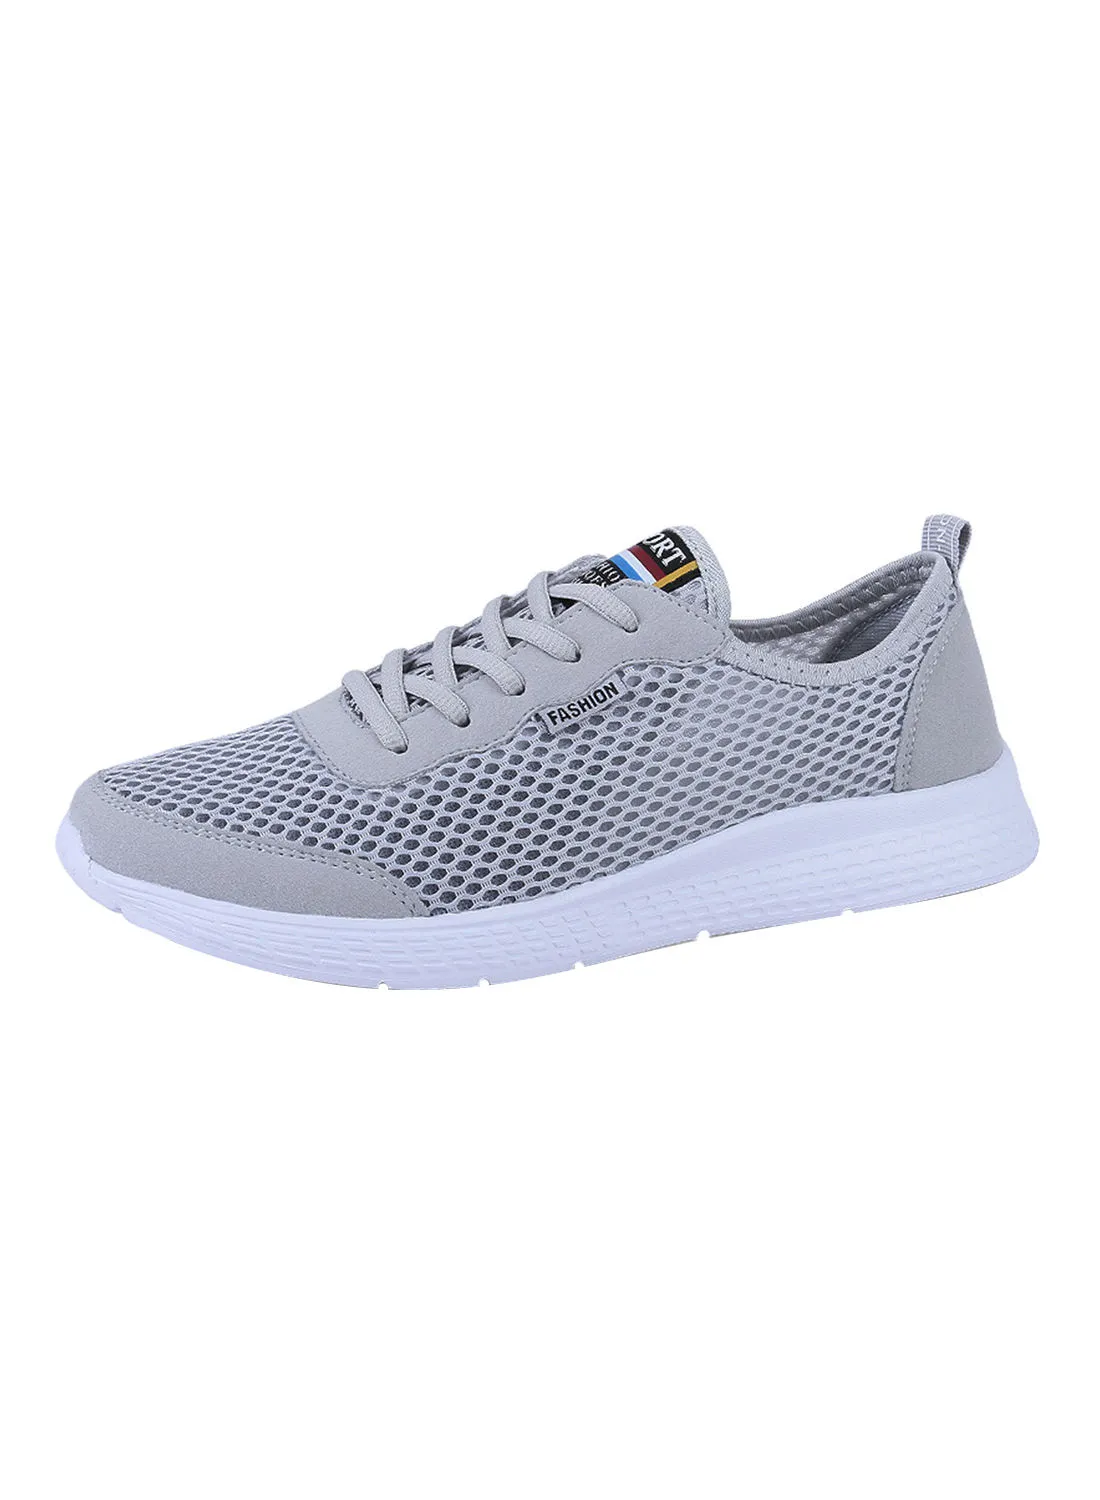 Generic Linking Breathable Lace Up Trainers Grey